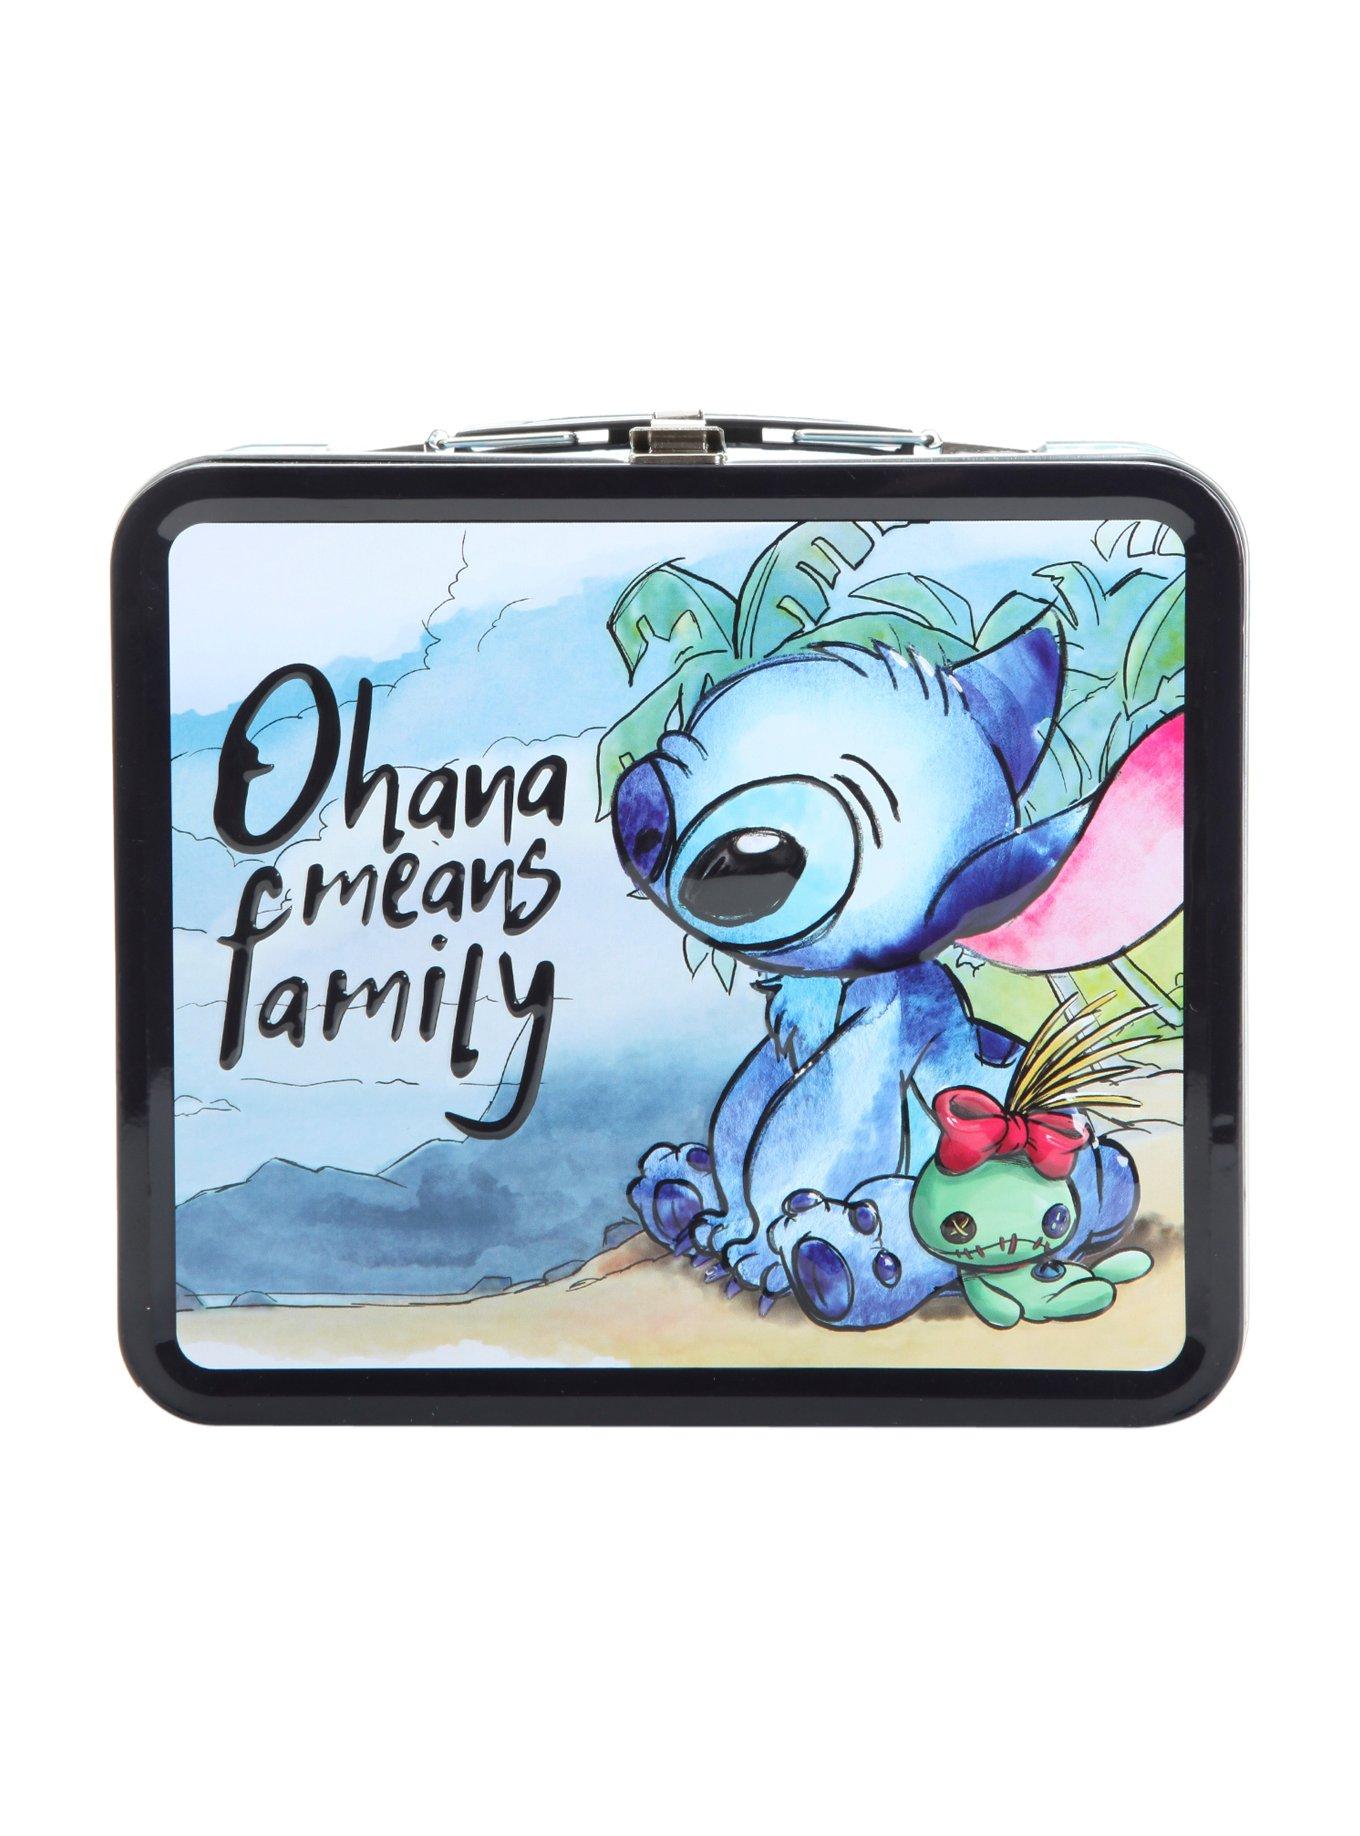 Disney, Accessories, Disney Lilo And Stitch Lunch Bag Girls Kids Lunch Box  Food Storage Container